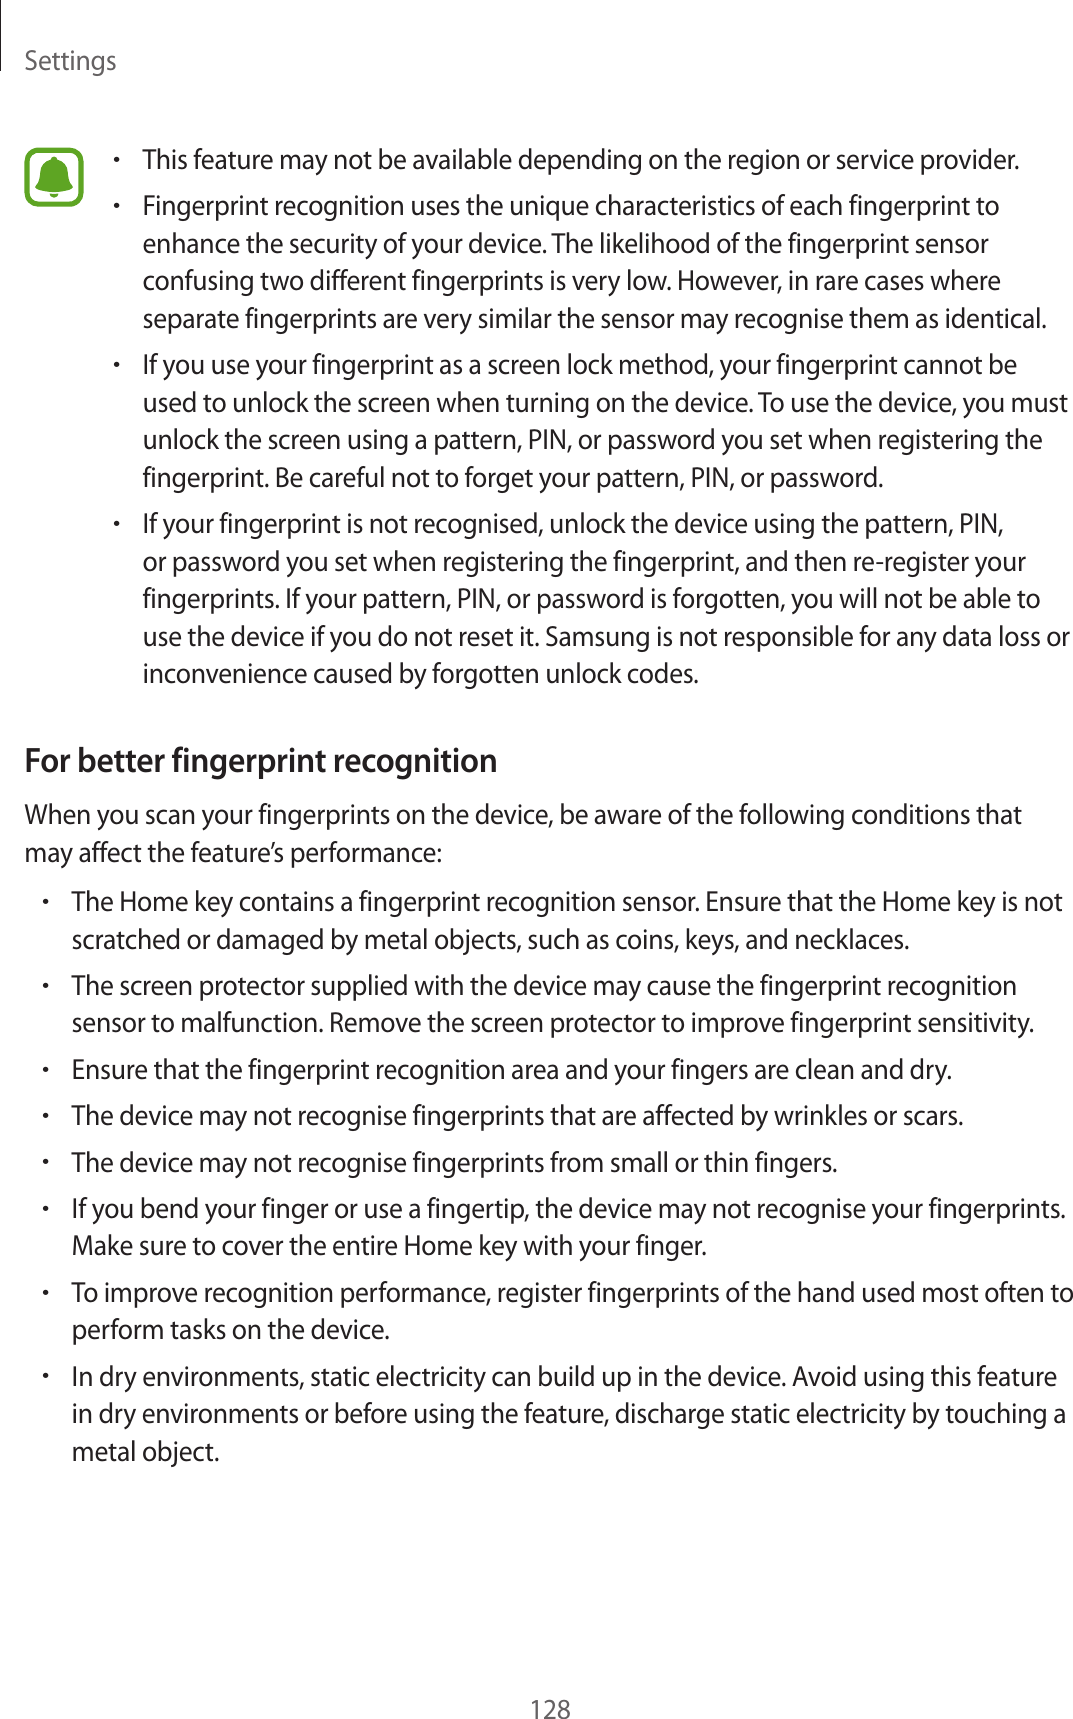 Settings128•This feature may not be available depending on the region or service provider.•Fingerprint recognition uses the unique characteristics of each fingerprint to enhance the security of your device. The likelihood of the fingerprint sensor confusing two different fingerprints is very low. However, in rare cases where separate fingerprints are very similar the sensor may recognise them as identical.•If you use your fingerprint as a screen lock method, your fingerprint cannot be used to unlock the screen when turning on the device. To use the device, you must unlock the screen using a pattern, PIN, or password you set when registering the fingerprint. Be careful not to forget your pattern, PIN, or password.•If your fingerprint is not recognised, unlock the device using the pattern, PIN, or password you set when registering the fingerprint, and then re-register your fingerprints. If your pattern, PIN, or password is forgotten, you will not be able to use the device if you do not reset it. Samsung is not responsible for any data loss or inconvenience caused by forgotten unlock codes.For better fingerprint recognitionWhen you scan your fingerprints on the device, be aware of the following conditions that may affect the feature’s performance:•The Home key contains a fingerprint recognition sensor. Ensure that the Home key is not scratched or damaged by metal objects, such as coins, keys, and necklaces.•The screen protector supplied with the device may cause the fingerprint recognition sensor to malfunction. Remove the screen protector to improve fingerprint sensitivity.•Ensure that the fingerprint recognition area and your fingers are clean and dry.•The device may not recognise fingerprints that are affected by wrinkles or scars.•The device may not recognise fingerprints from small or thin fingers.•If you bend your finger or use a fingertip, the device may not recognise your fingerprints. Make sure to cover the entire Home key with your finger.•To improve recognition performance, register fingerprints of the hand used most often to perform tasks on the device.•In dry environments, static electricity can build up in the device. Avoid using this feature in dry environments or before using the feature, discharge static electricity by touching a metal object.